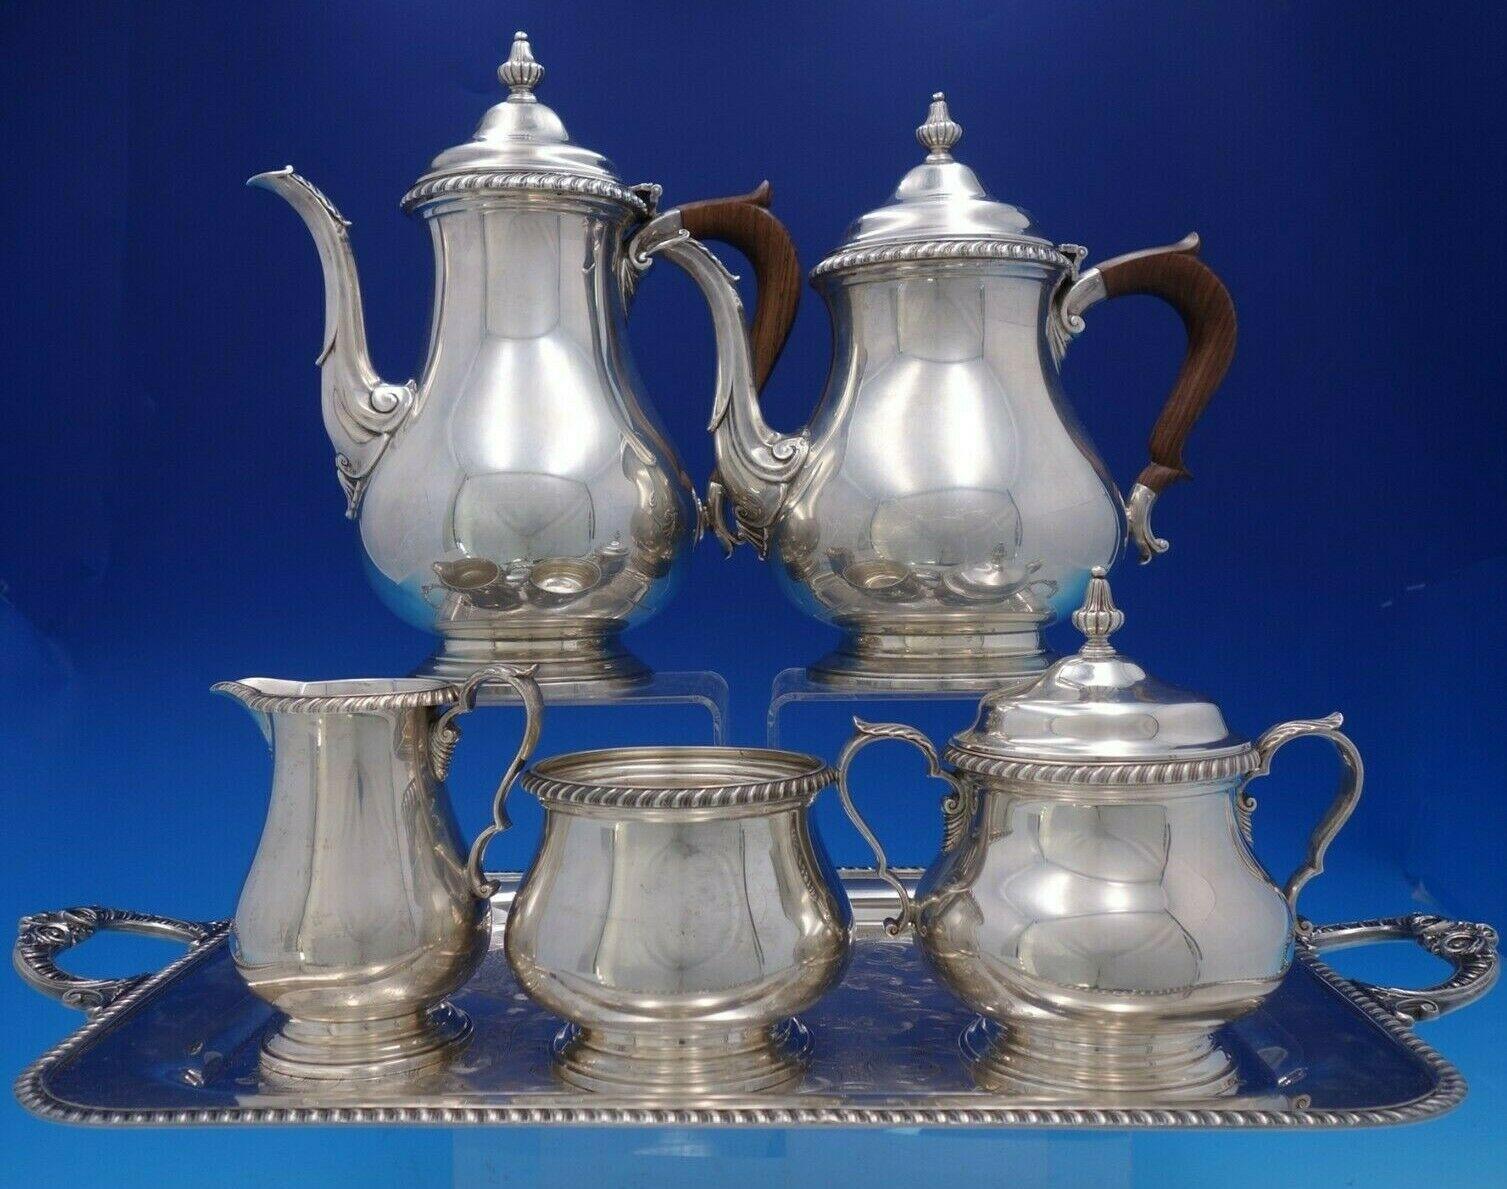 English Gadroon

English Gadroon sterling silver 5-piece piece tea set with plated tray.
The coffee pot measures 10